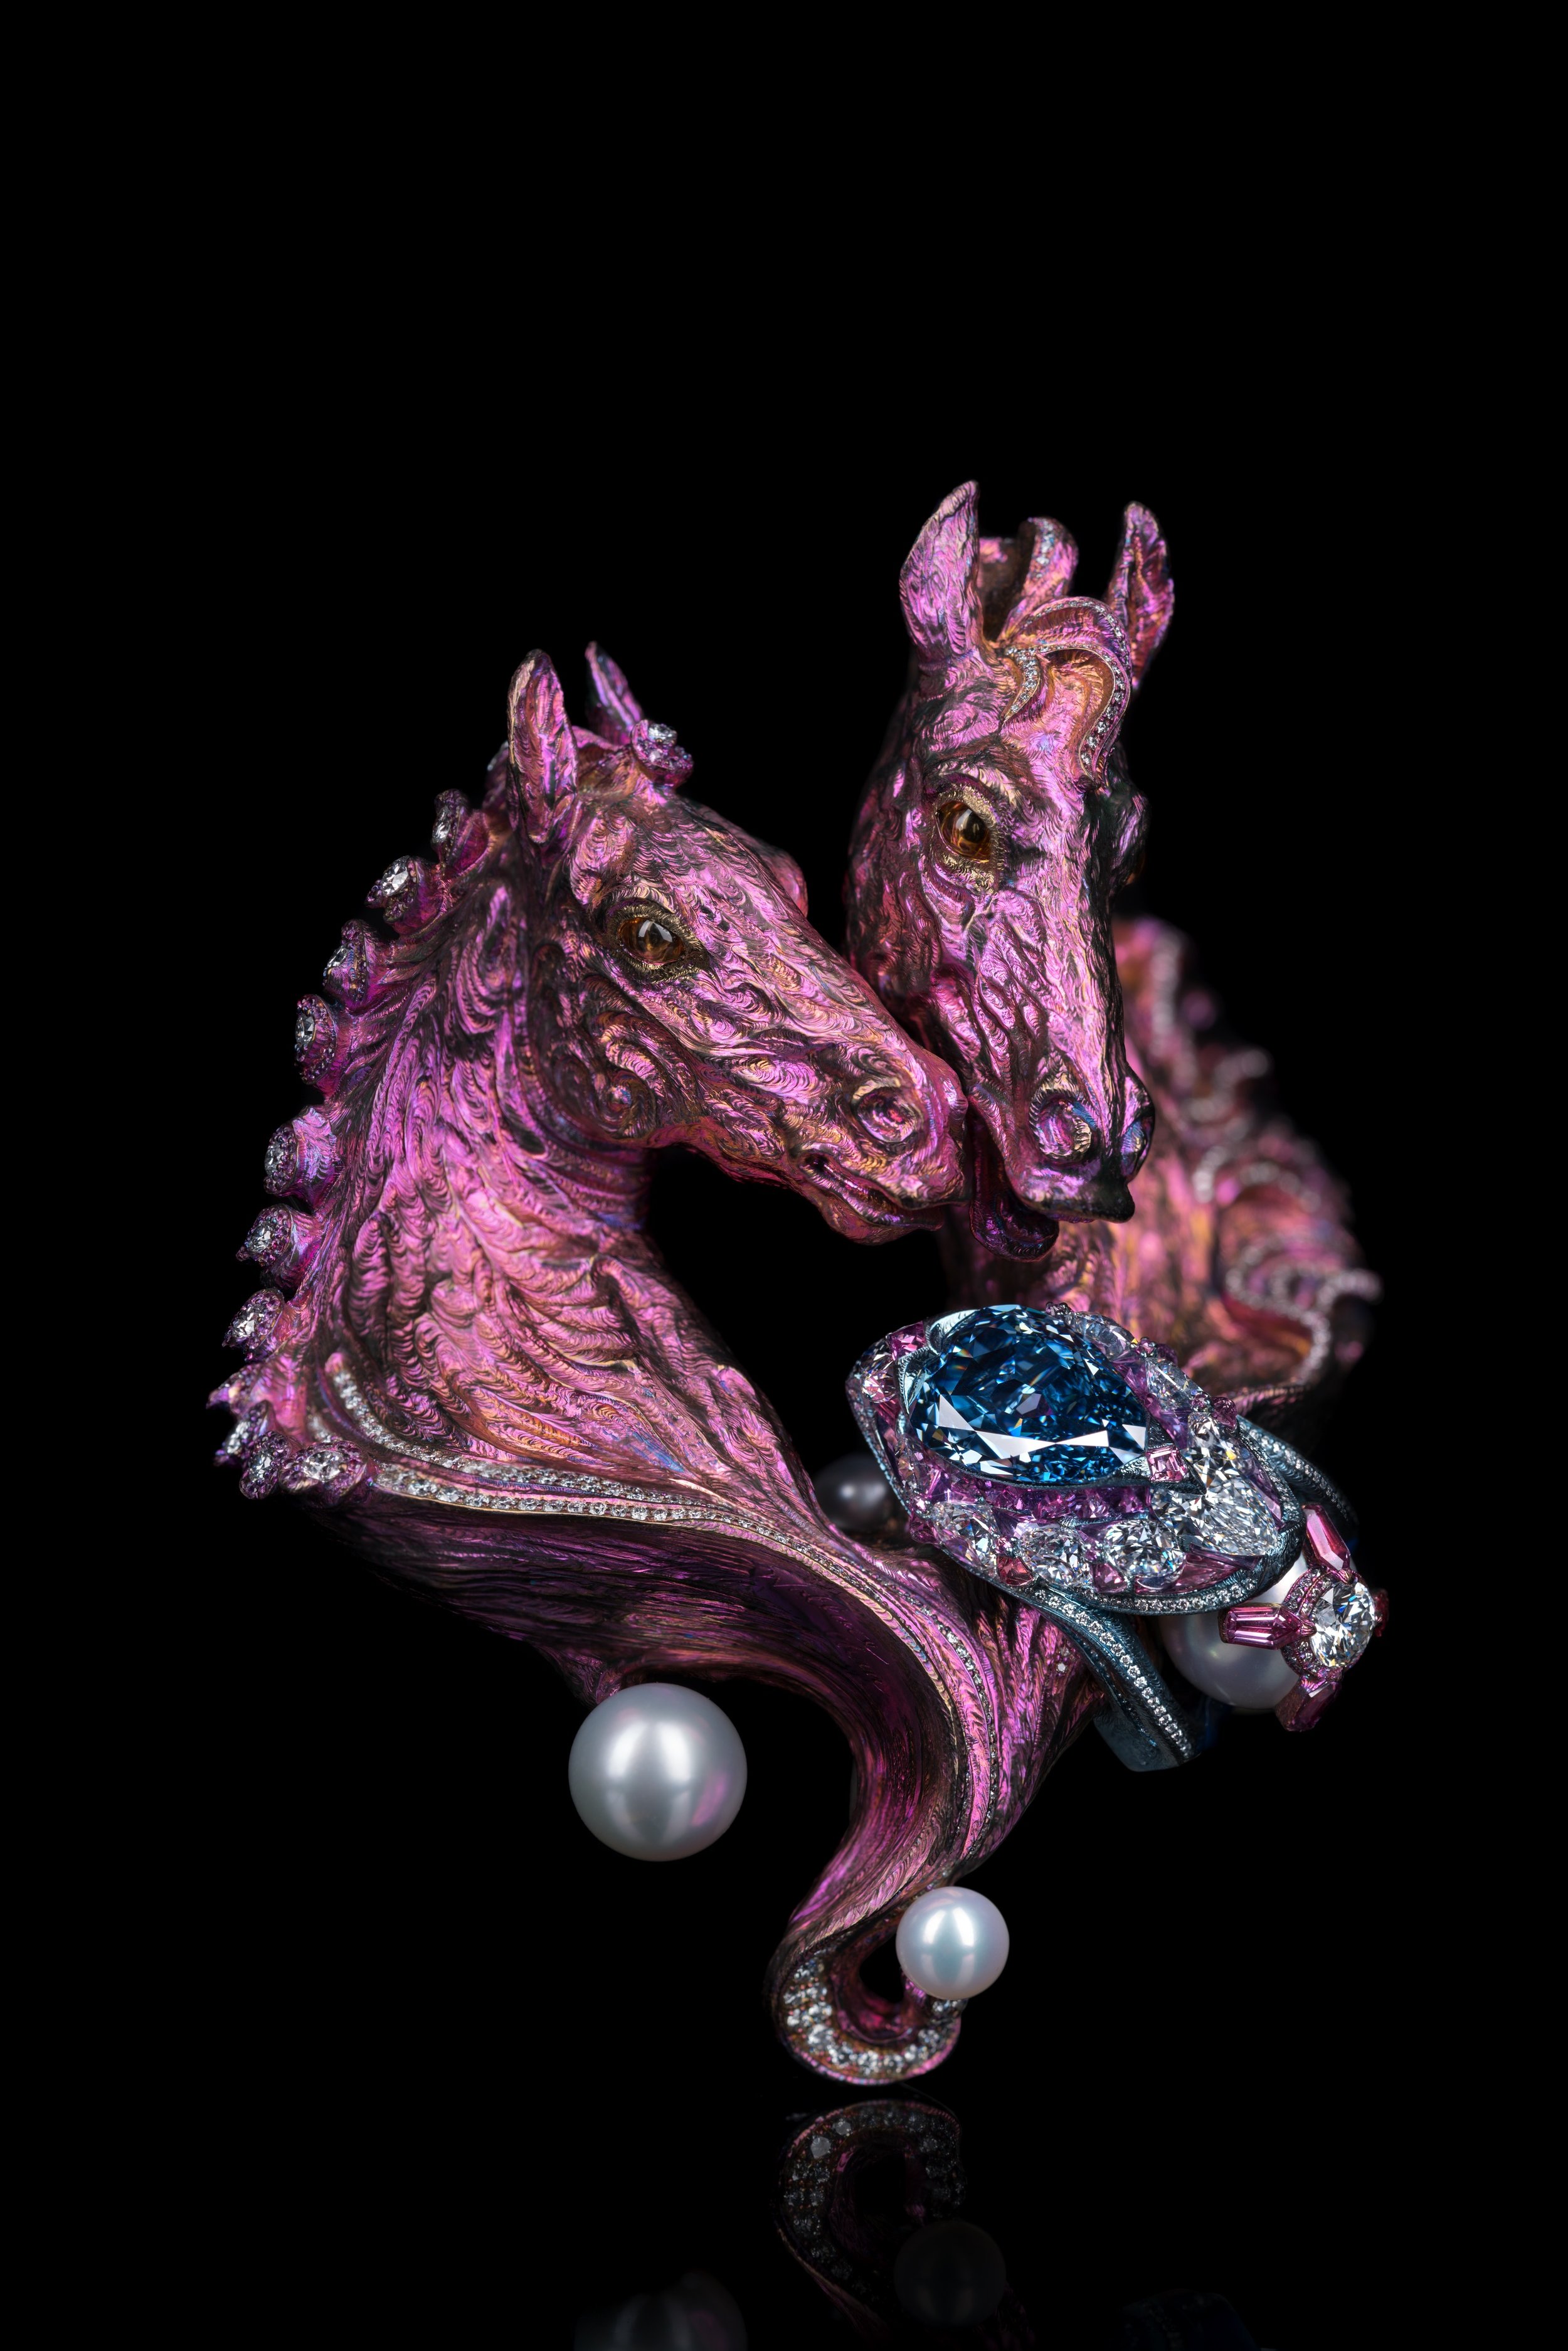 Ring, Brooch and Sculpture_The Love of Two Horses ╖R╖N⌐b─╦ 2.jpg